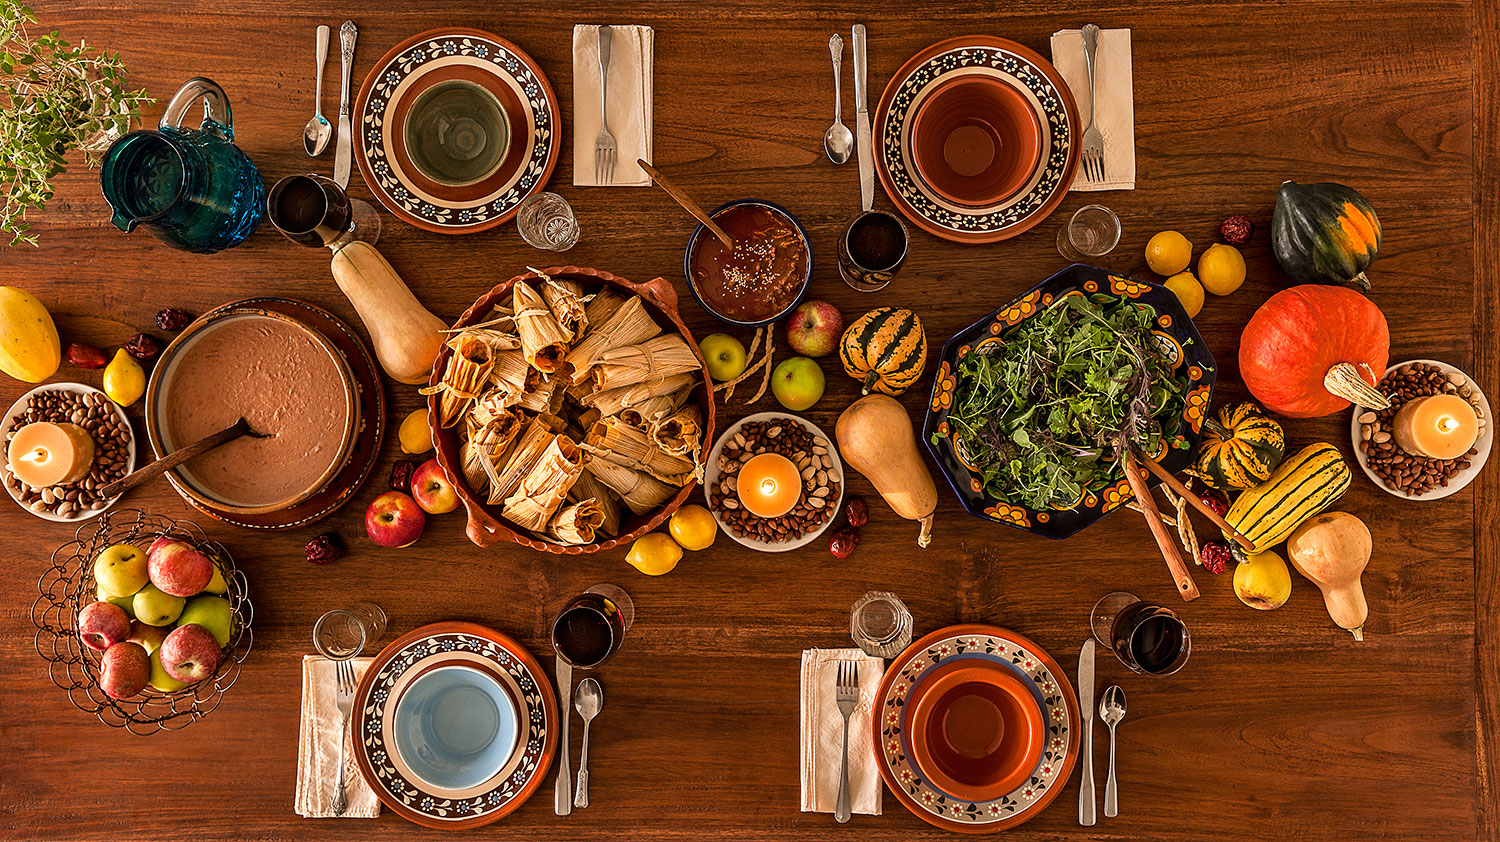 Southwest Thanksgiving table